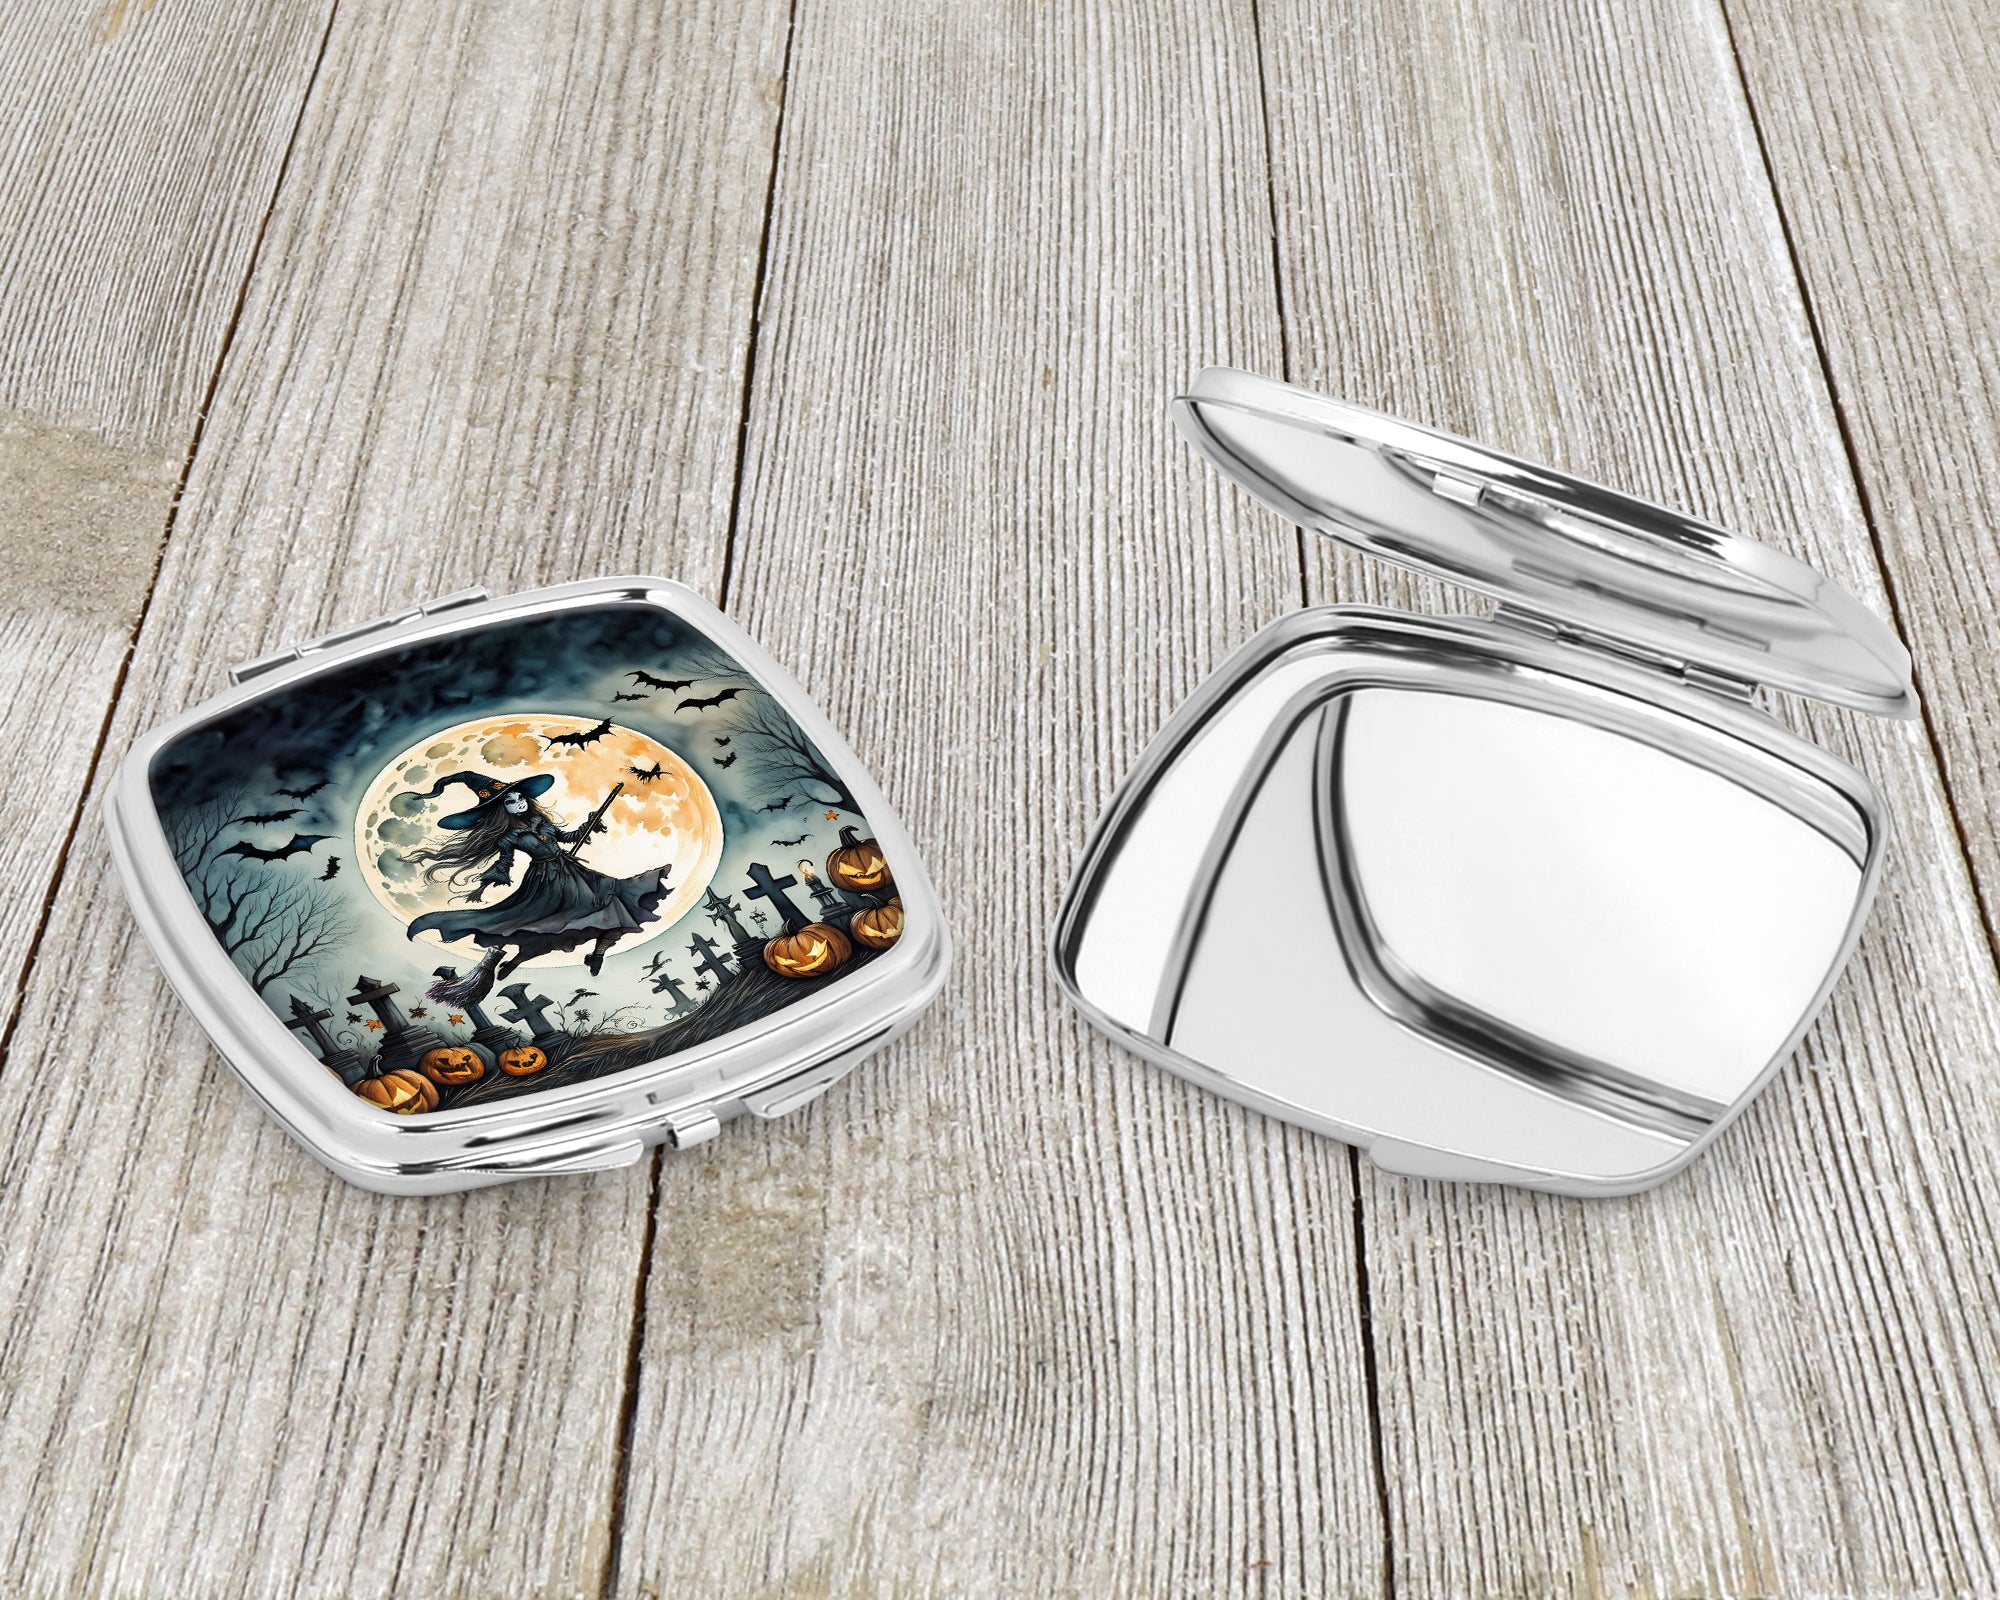 Flying Witch Spooky Halloween Compact Mirror